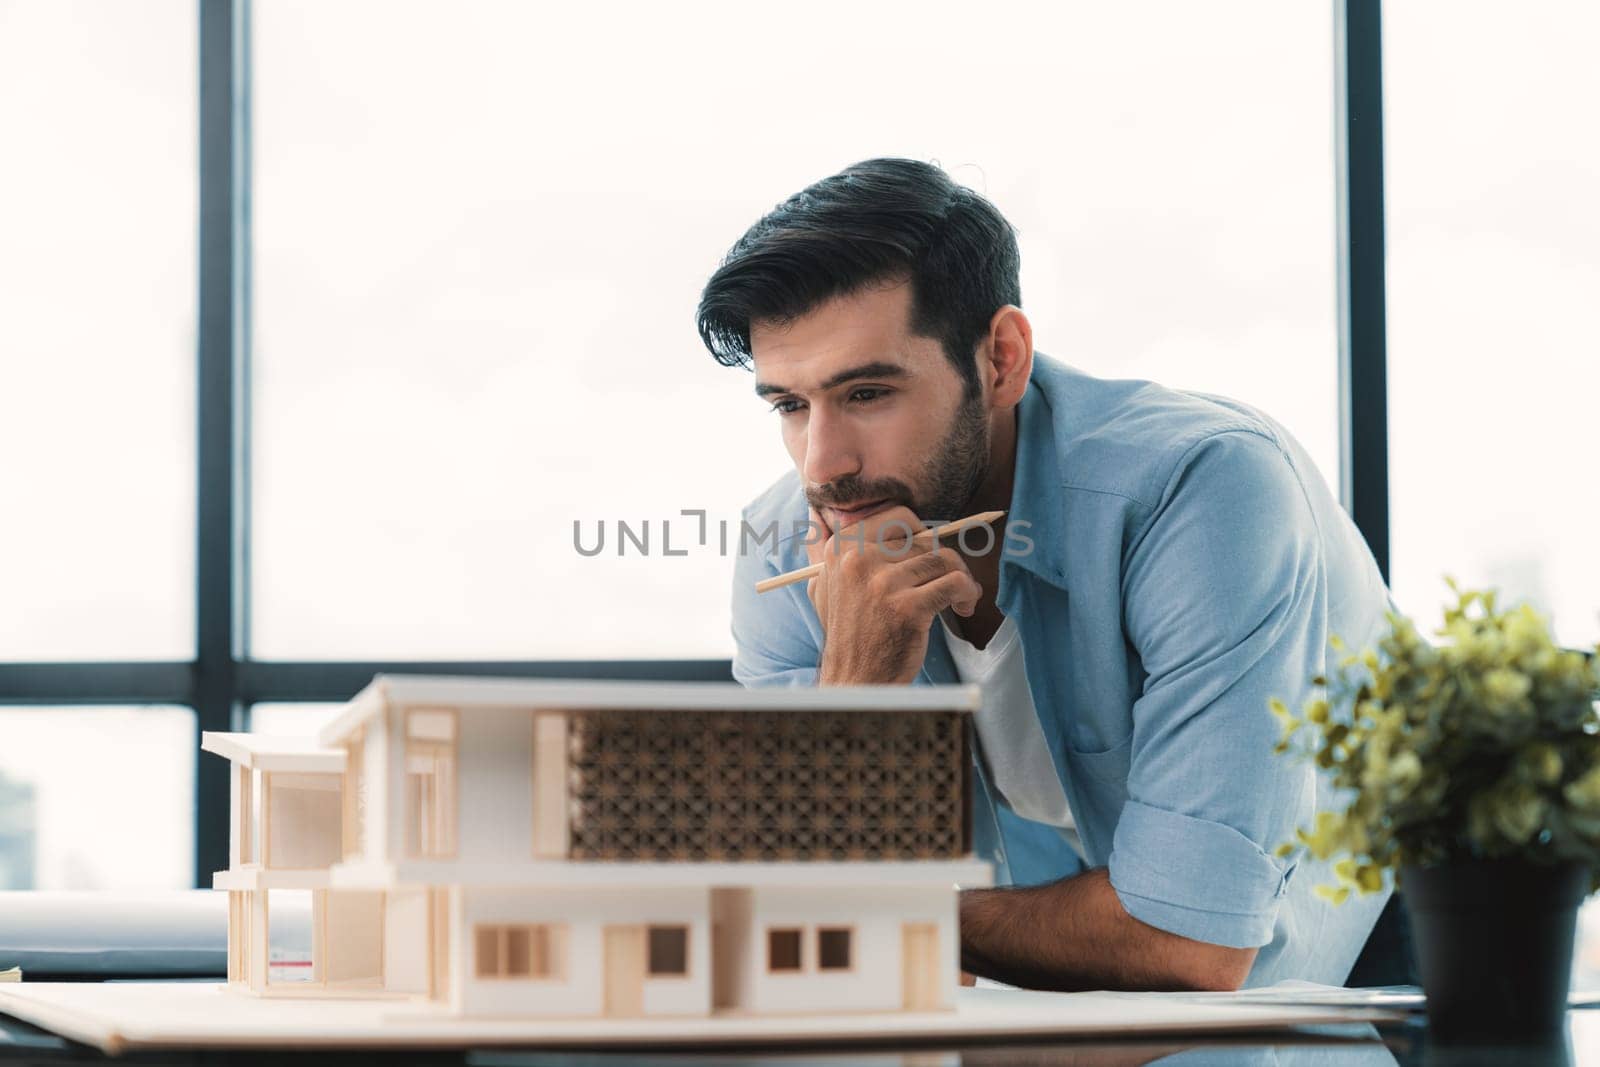 Smart civil architect engineer looking while planing design house construction with blueprint, house model and architectural equipment. Designer measuring and inspecting house model. Design. Tracery.